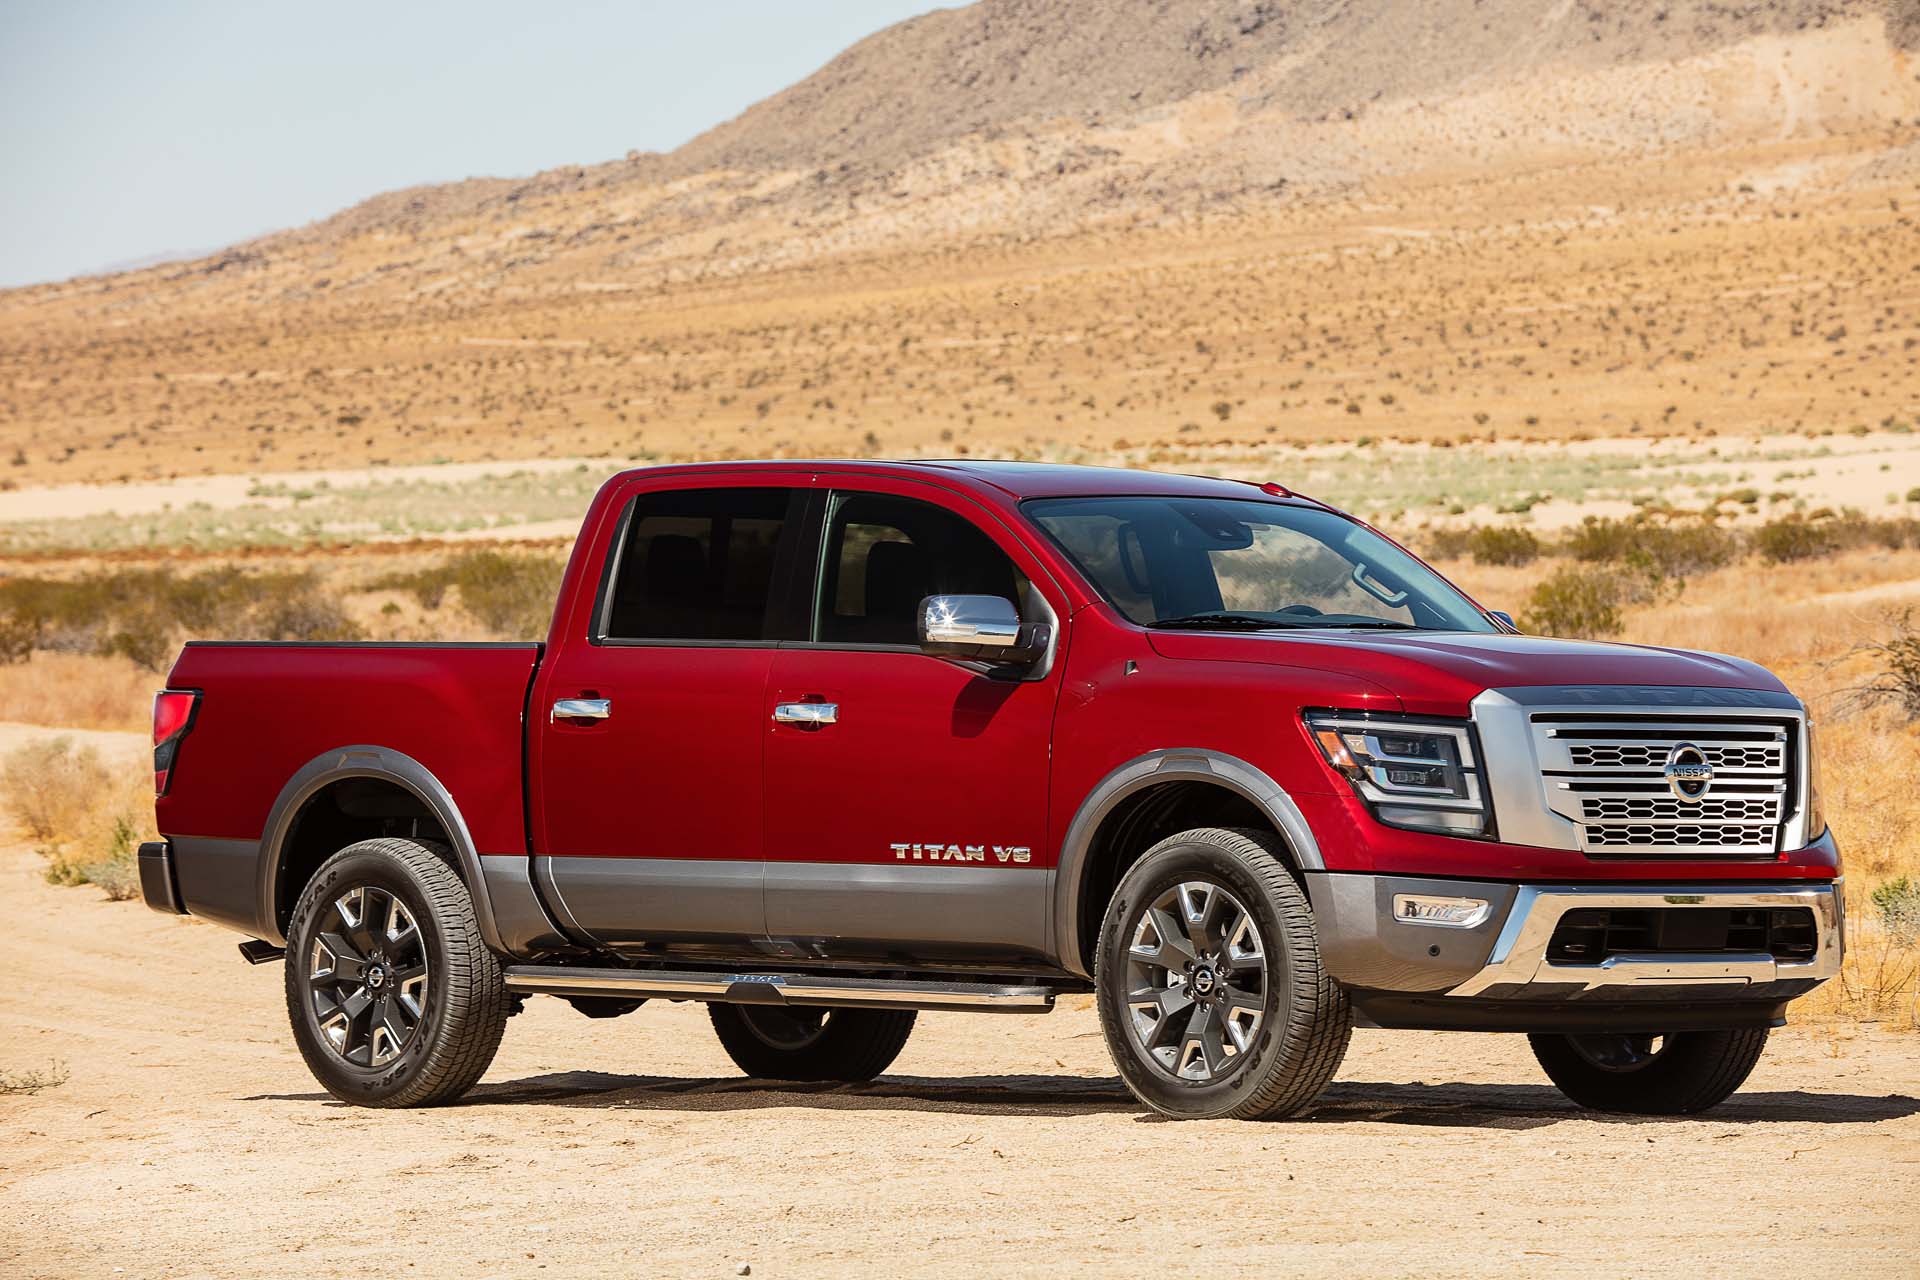 2020 Nissan Titan the look of the Warrior and a 9speed transmission